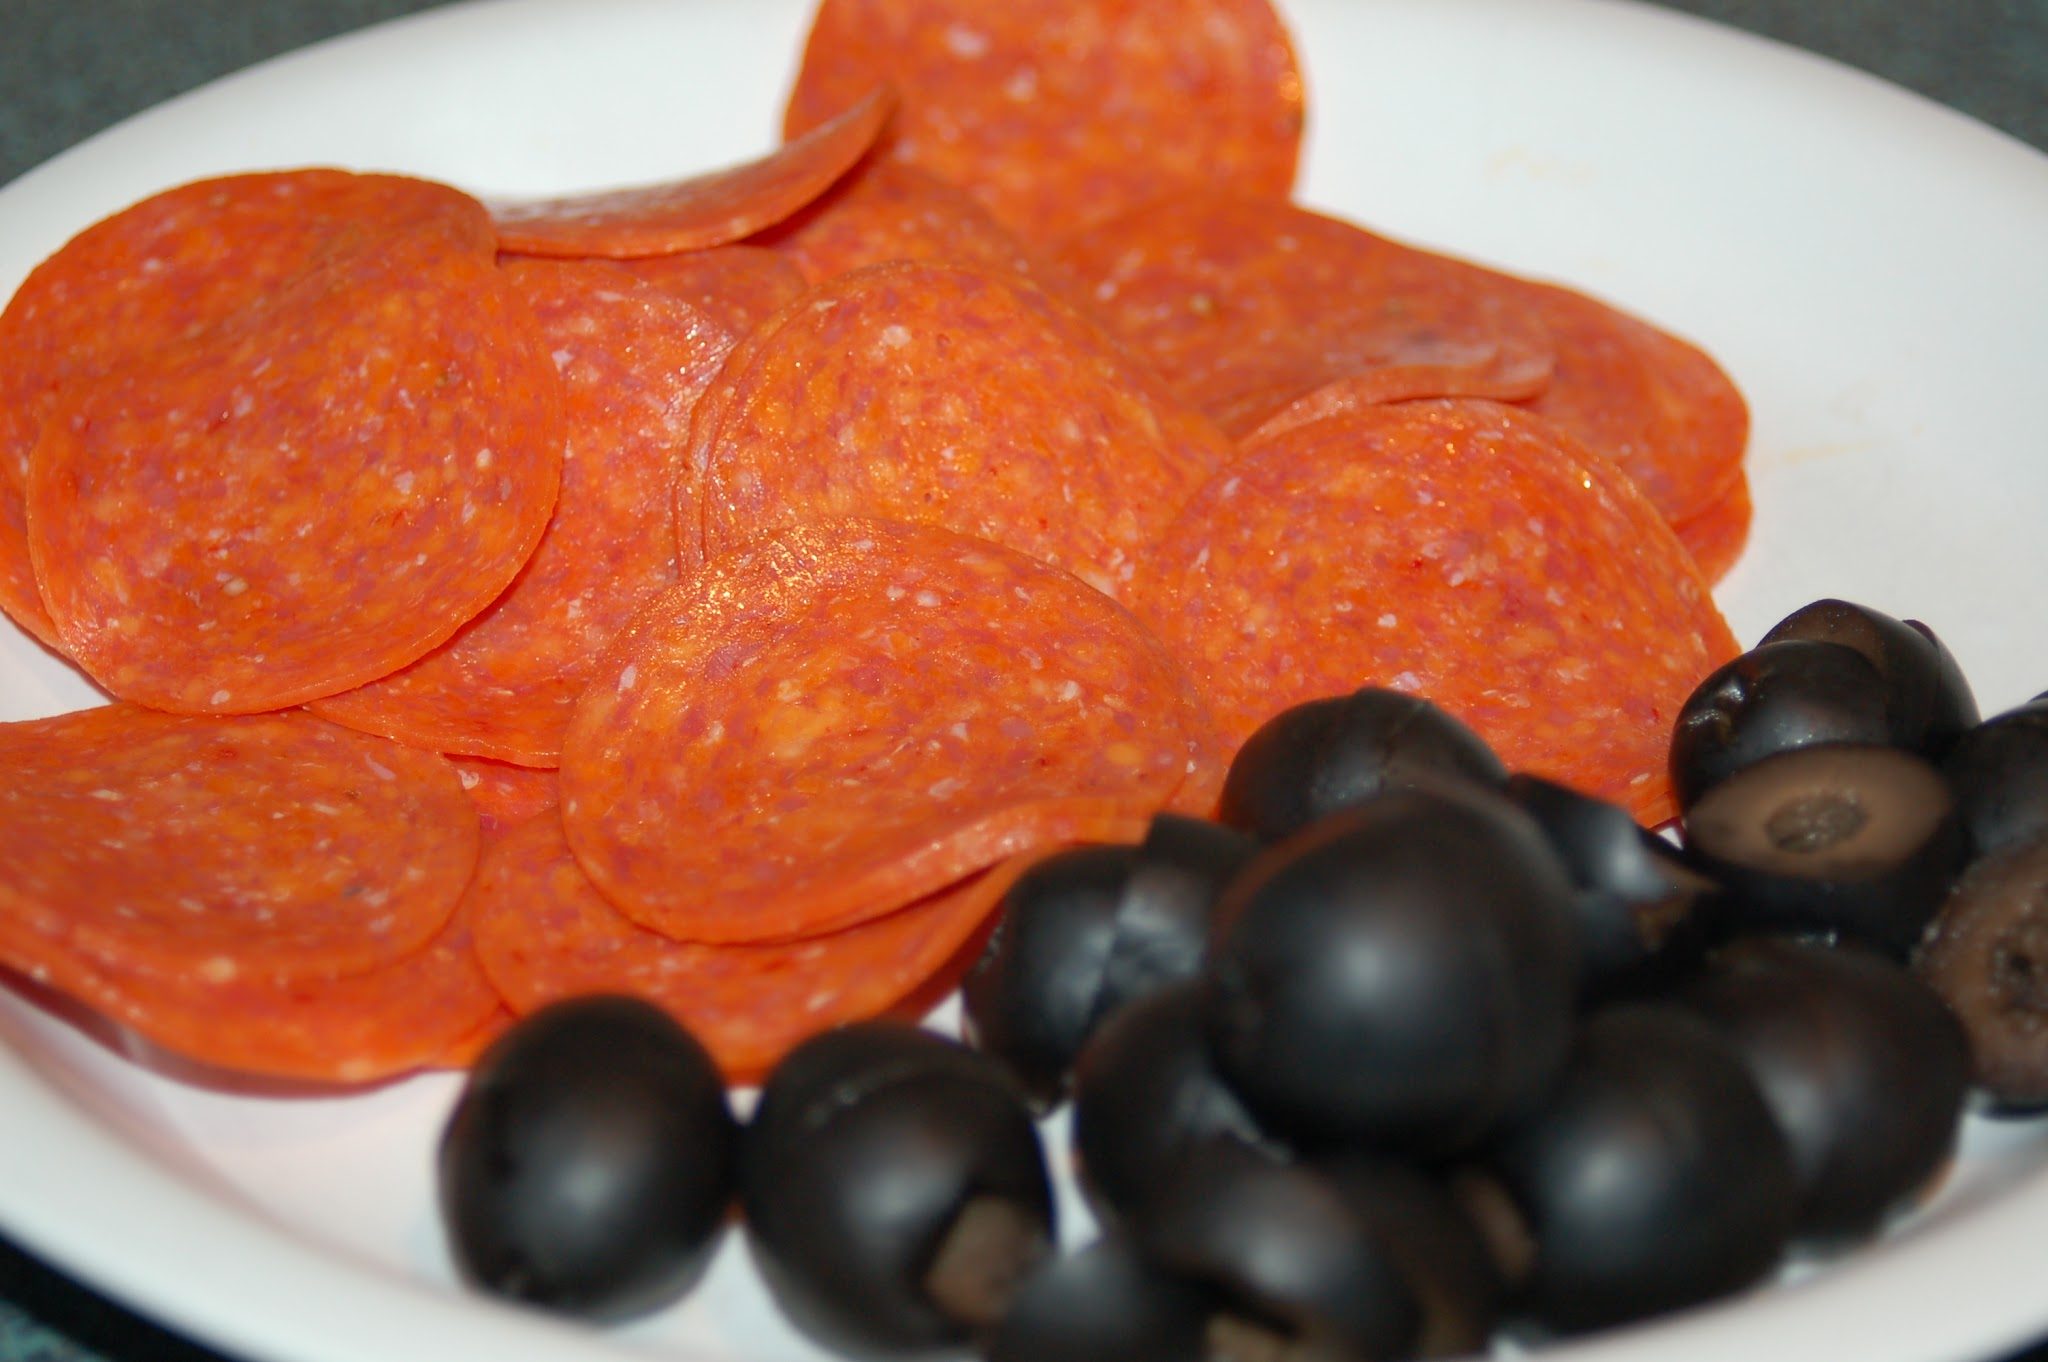 pepperoni slices and black olives